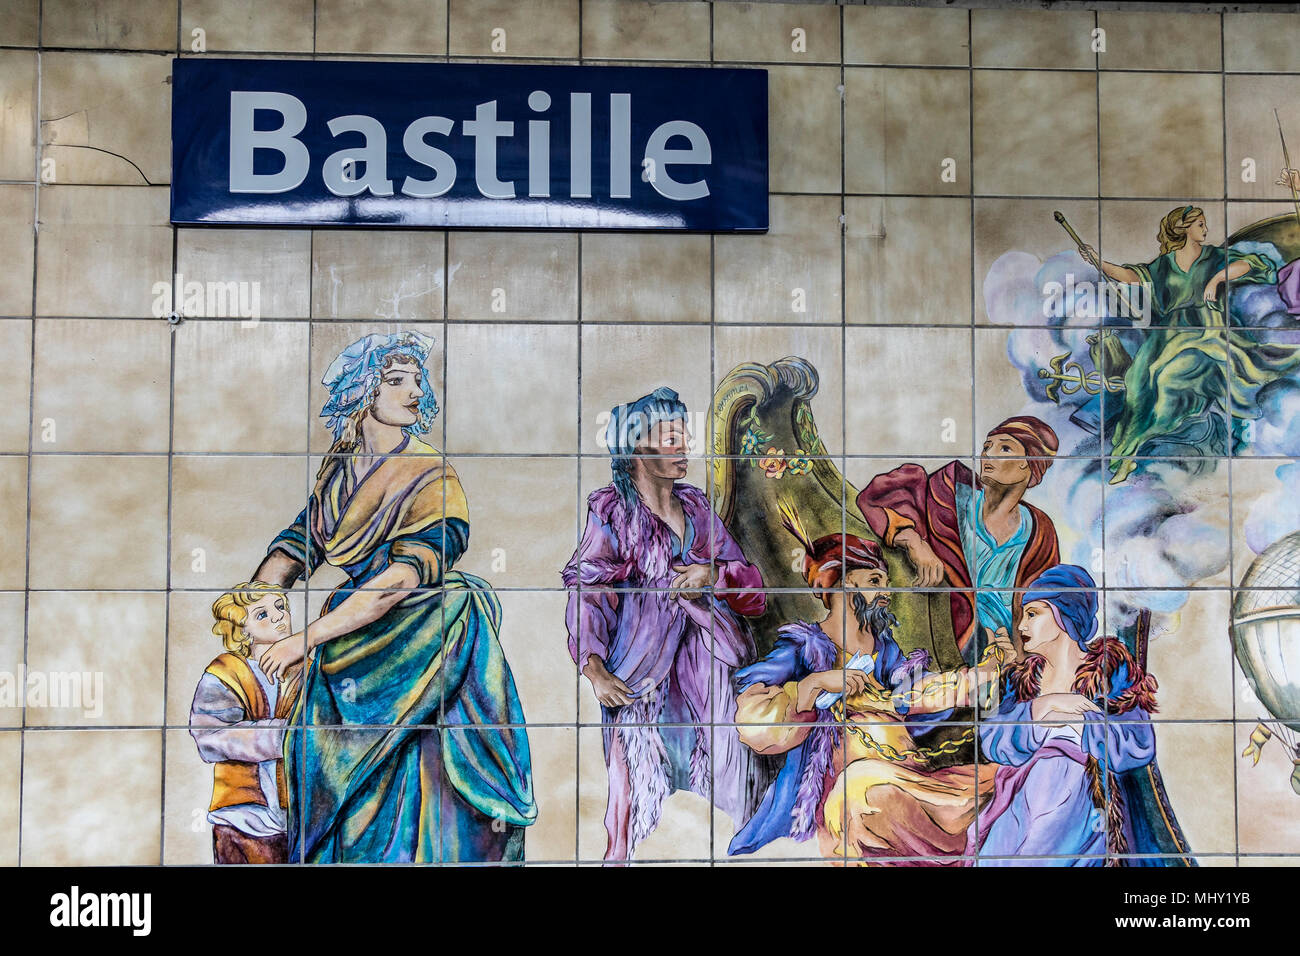 Bastille Metro station on The Paris Metro with ceramic tiles depicting The storming of The Bastille on 14th July ,1789 Stock Photo